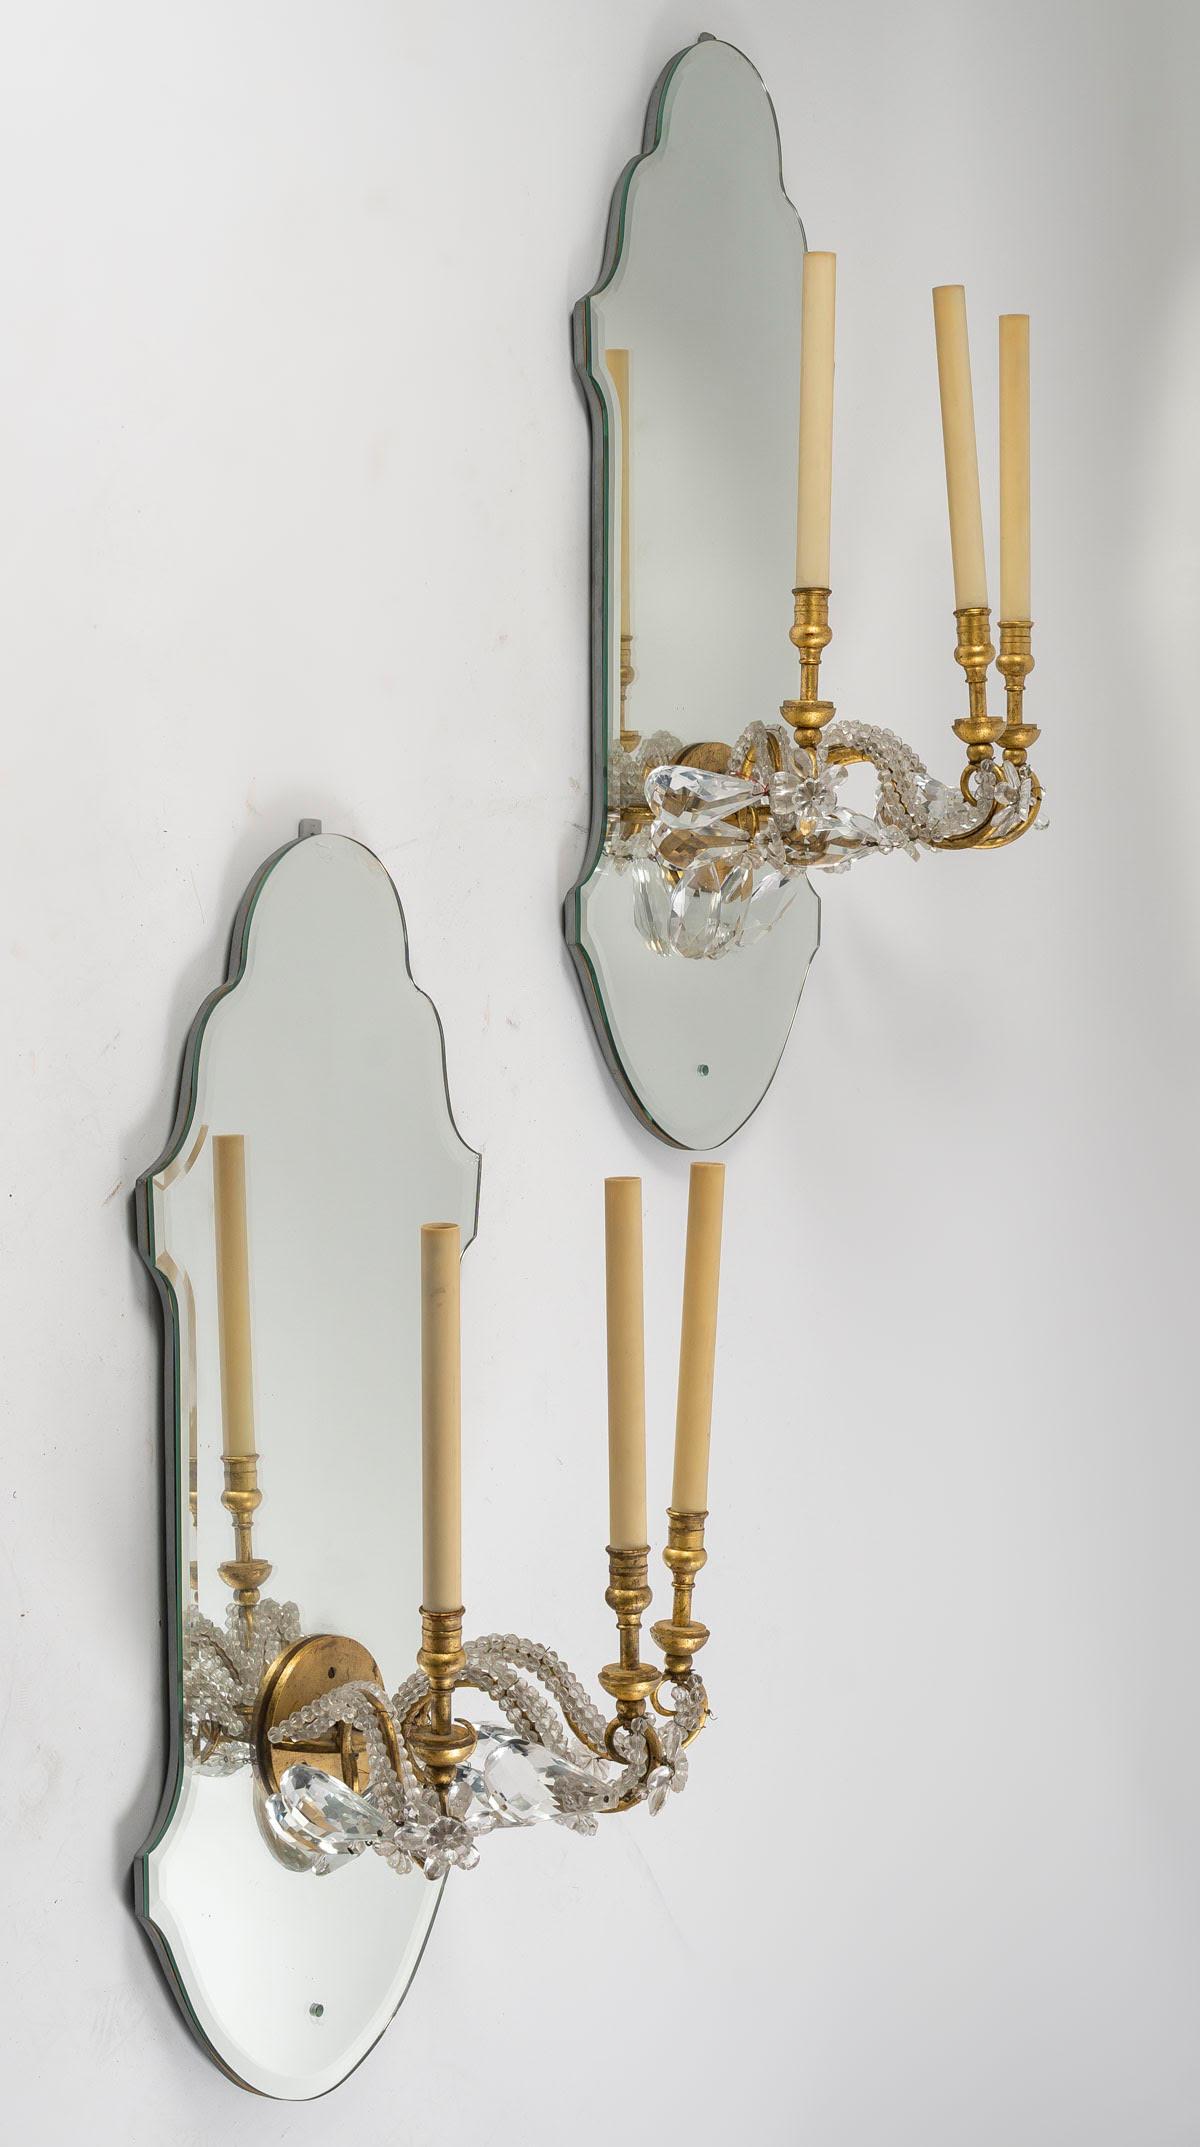 French Suite of 6 Gilded Iron and Mirror Sconces with Glass Drops, 1950-1960.